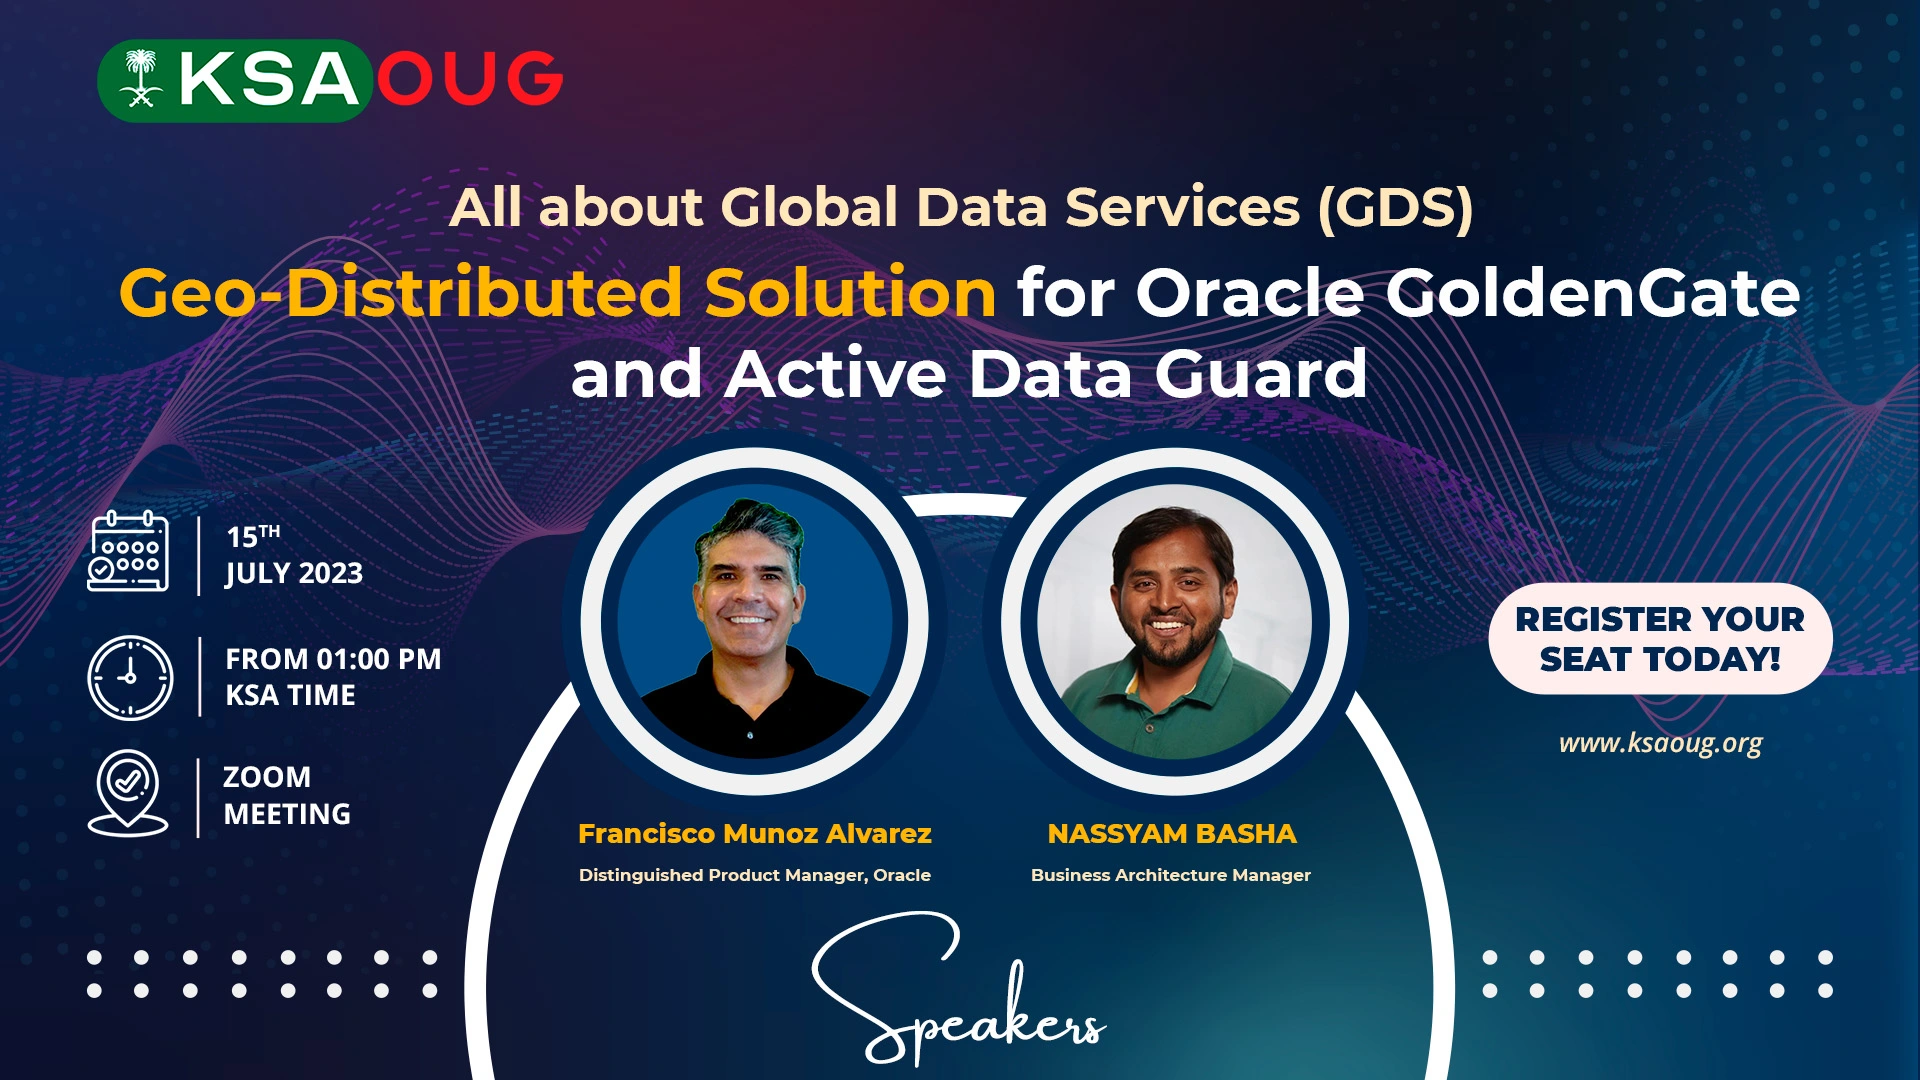 KSAOUG Connnect With Francisco and Nassyam - All about Global Data Services (GDS)